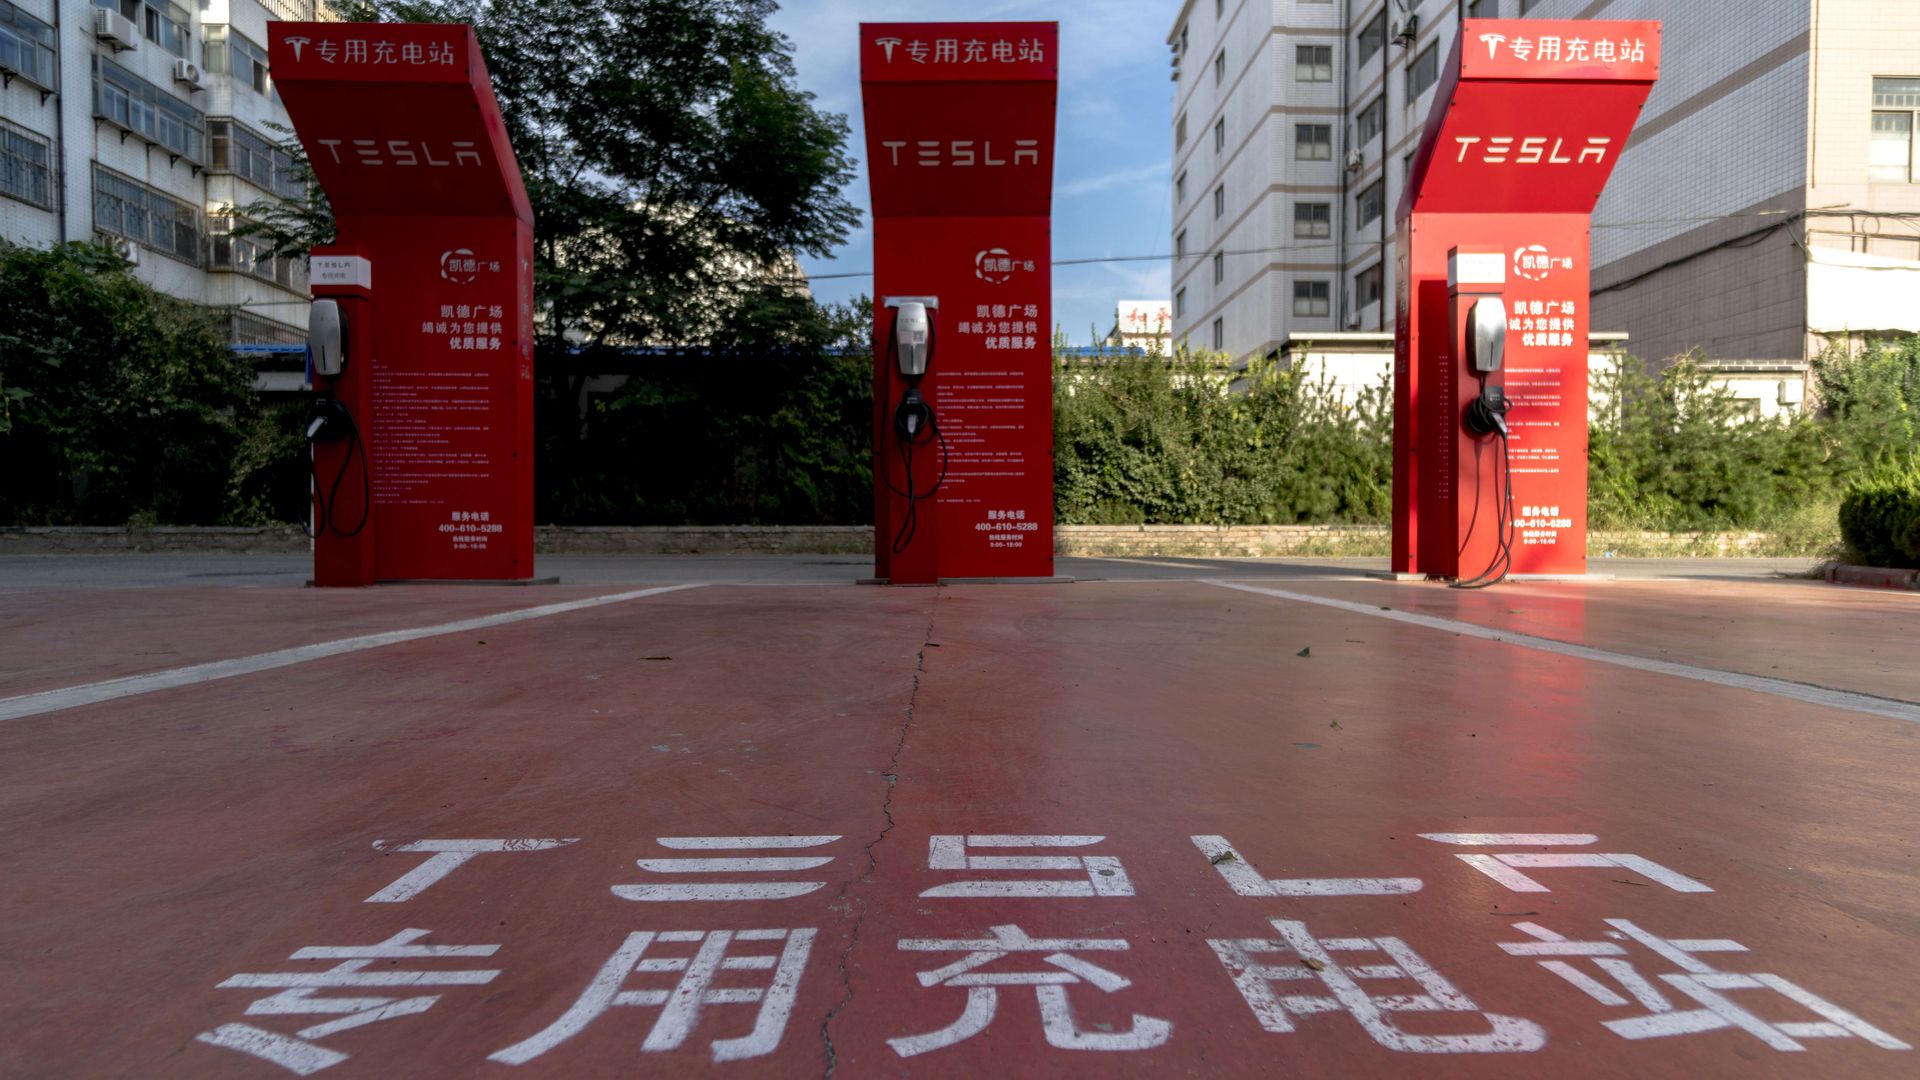 Tesla charging stations in China